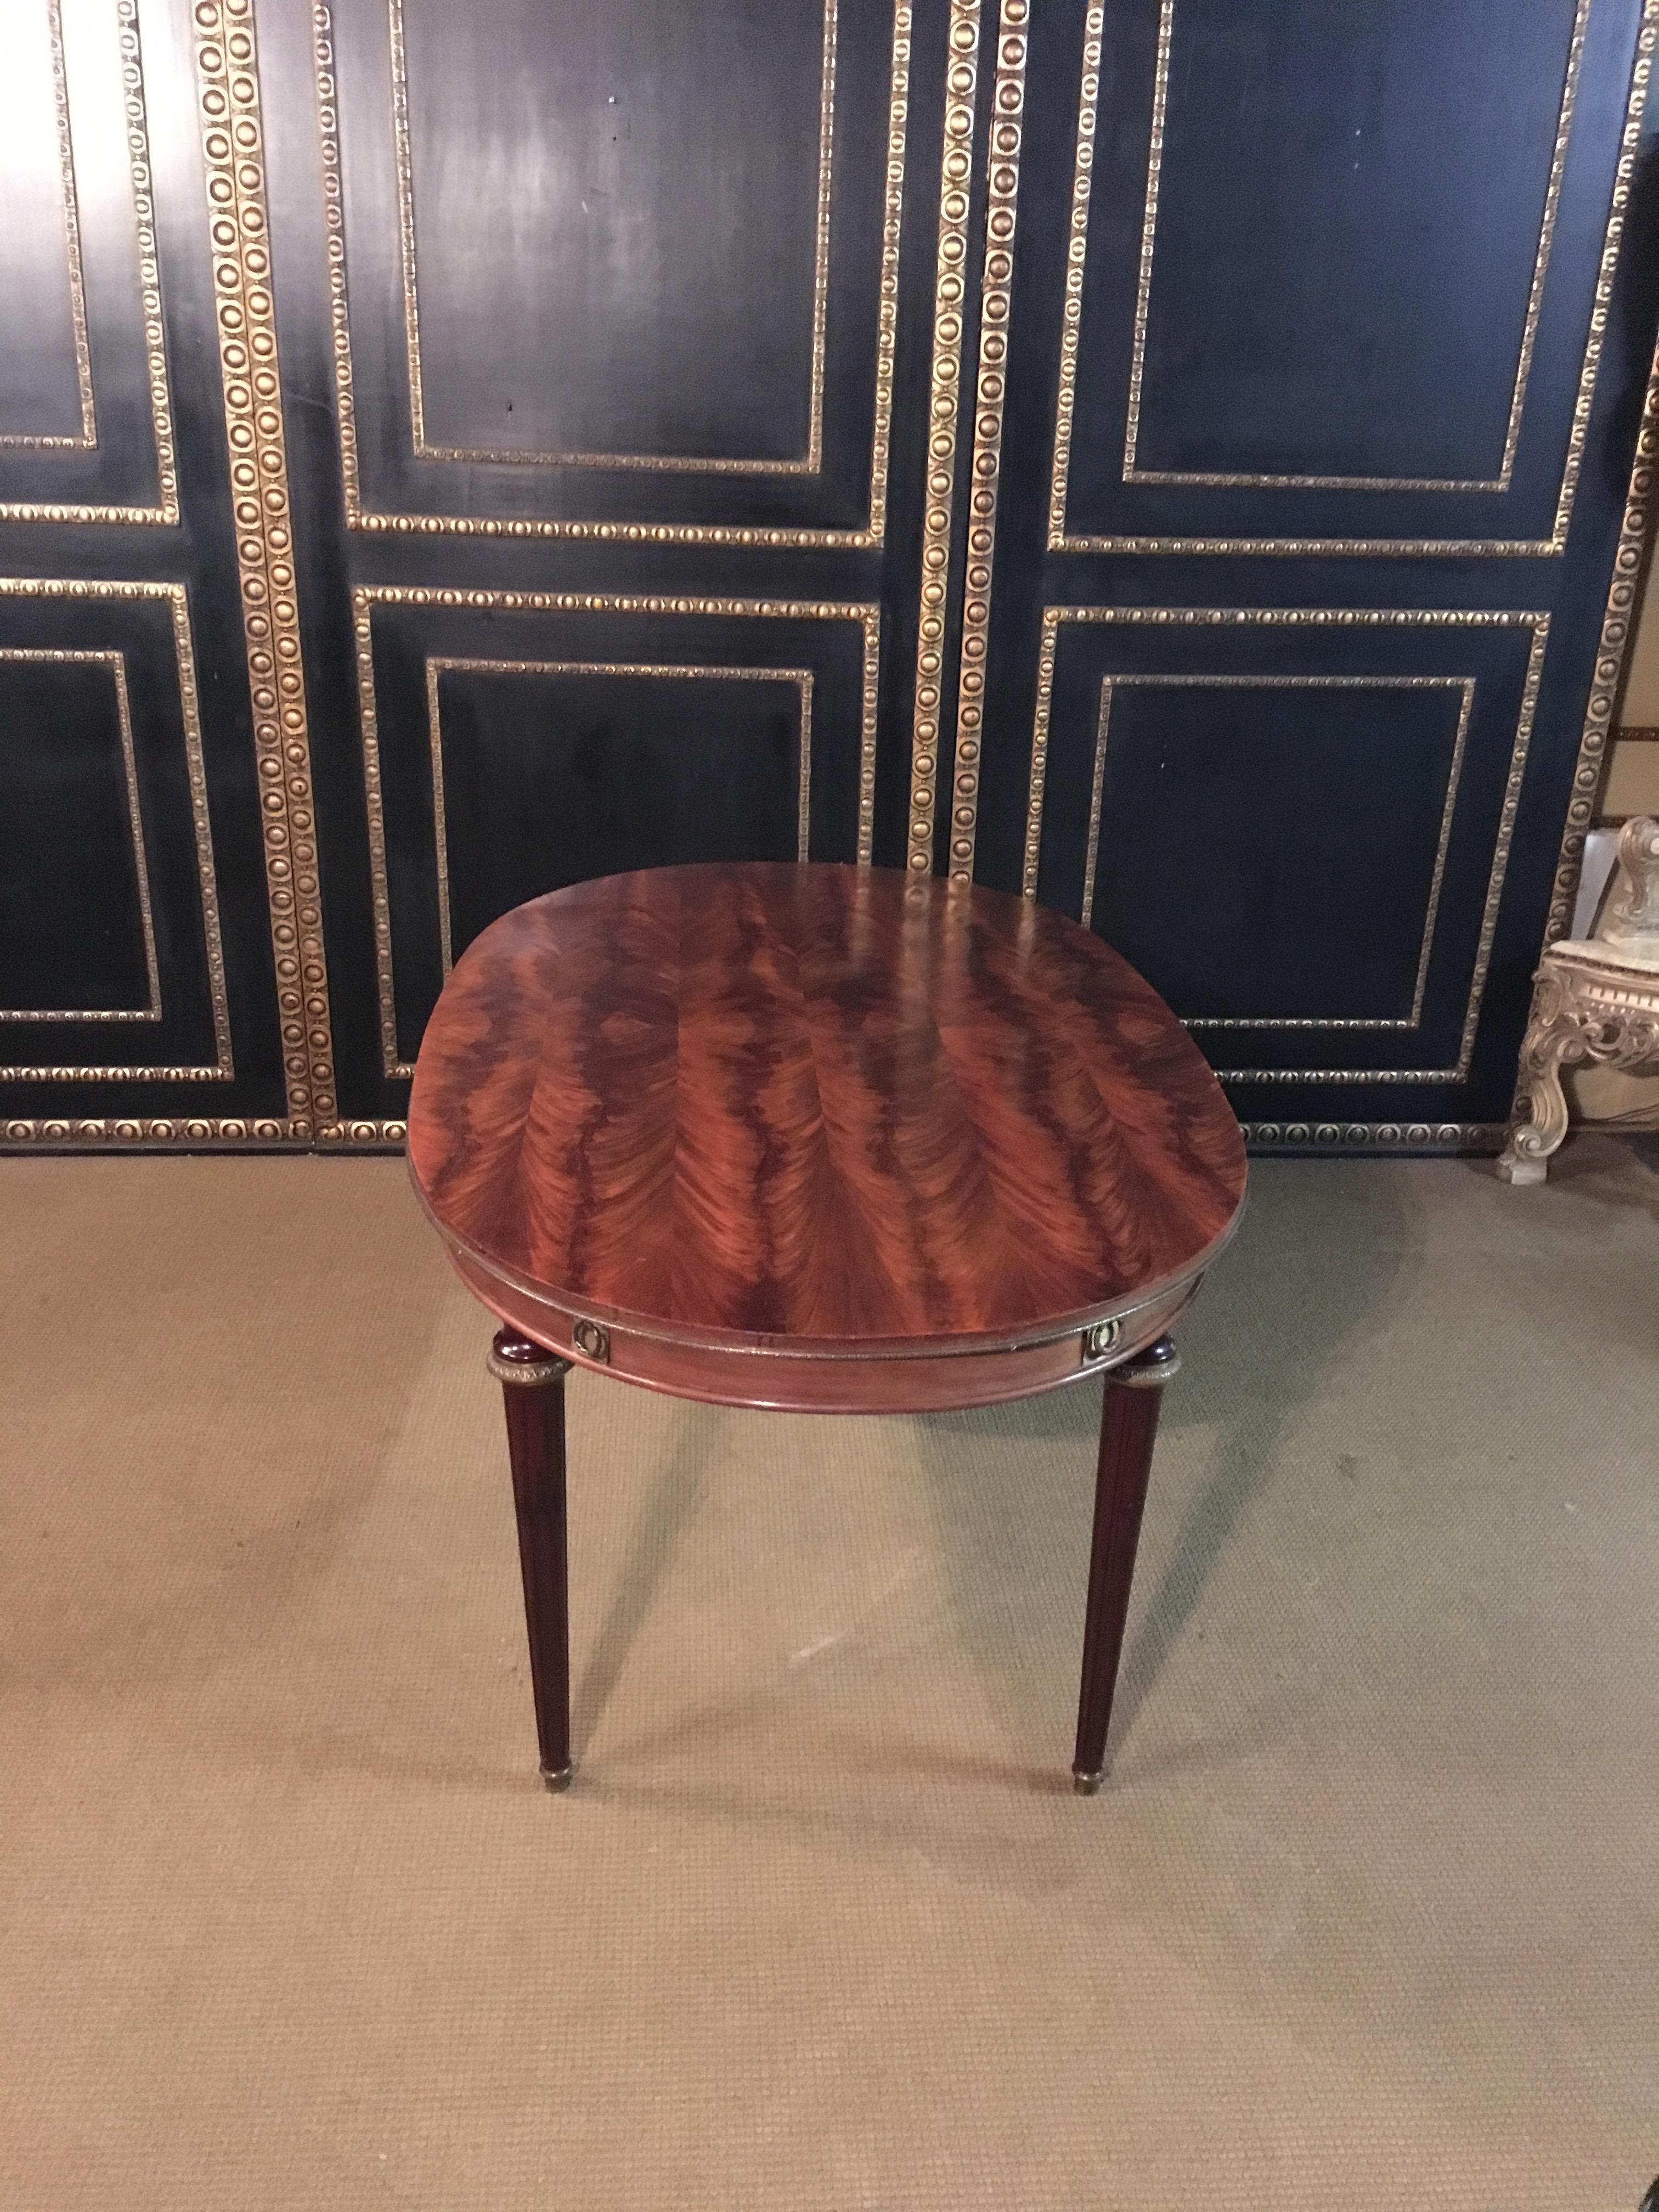 Beautiful dining table in Empire style.
High quality pyramid mahogany stands on 4 high legs with bronze fittings.
Extendable pieces of wood on the side to take the table, plates missing.